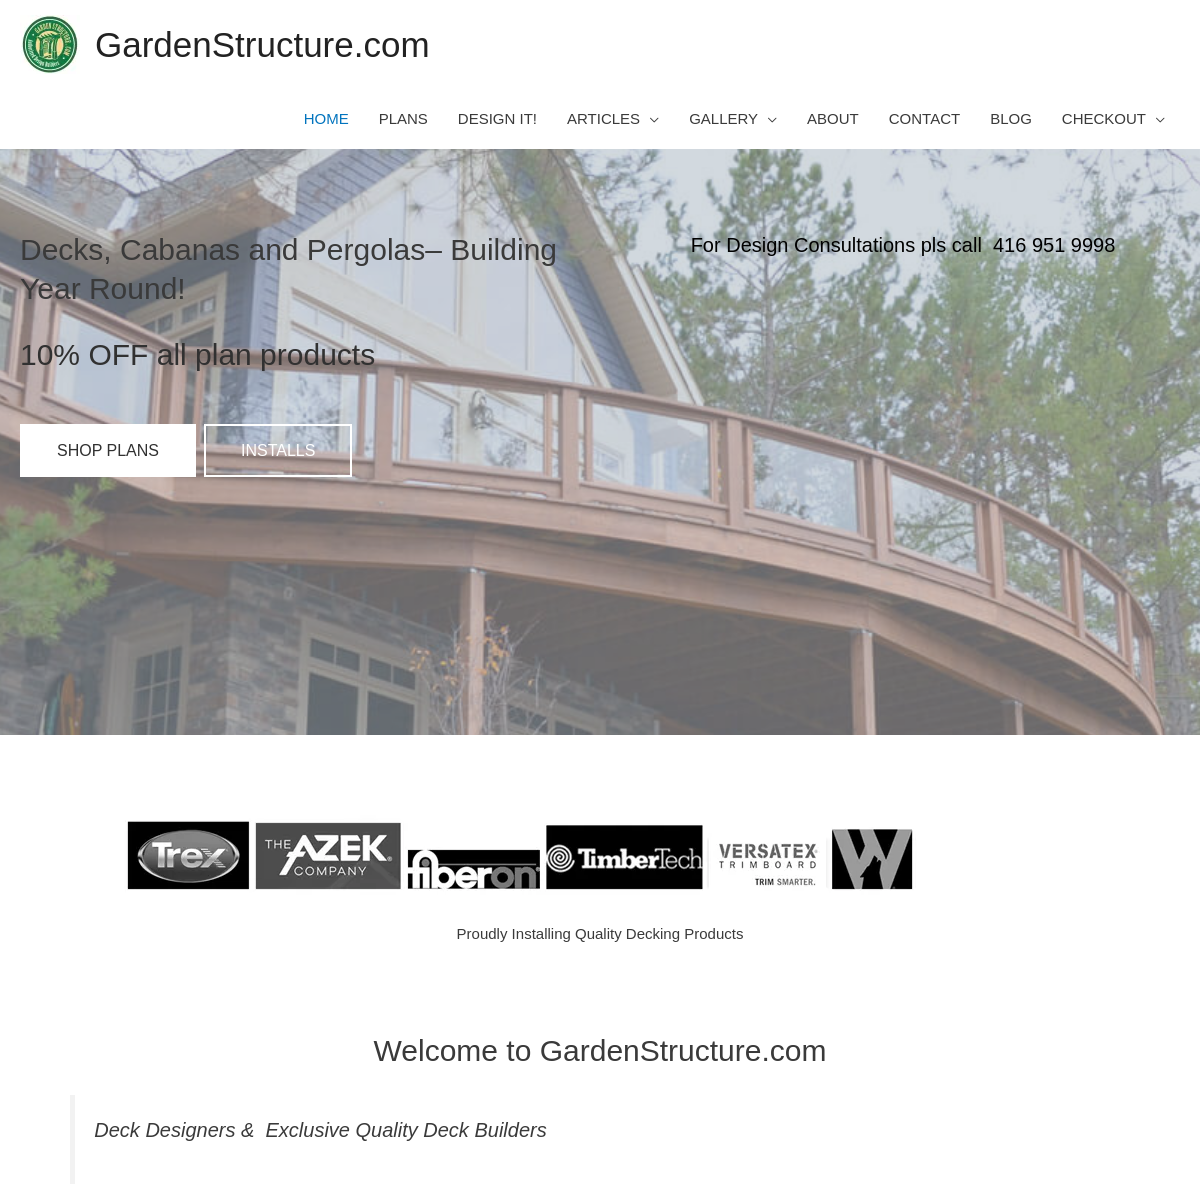 A complete backup of gardenstructure.com